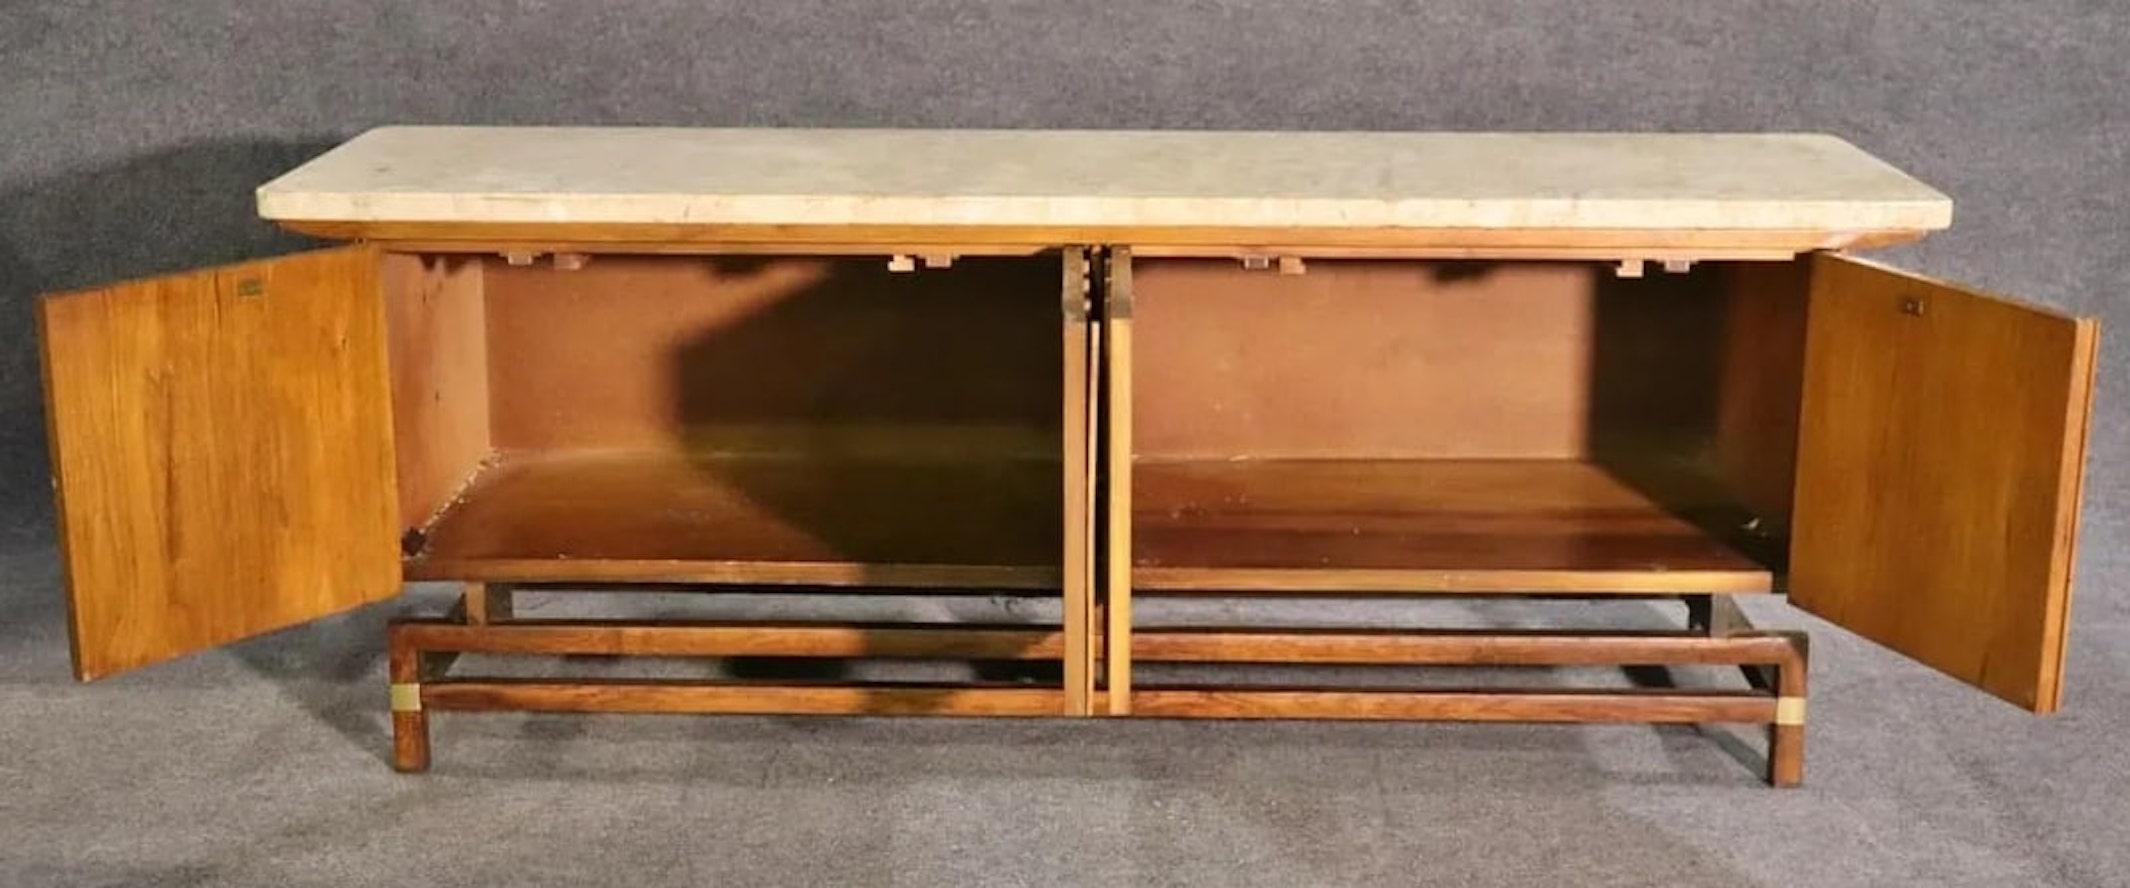 Mid-century Asian style sideboard by Hickory Furniture for their 'Tung Si' collection. Heavy marble top, two wide cabinets, floating body, brass hardware.
Please confirm location NY or NJ